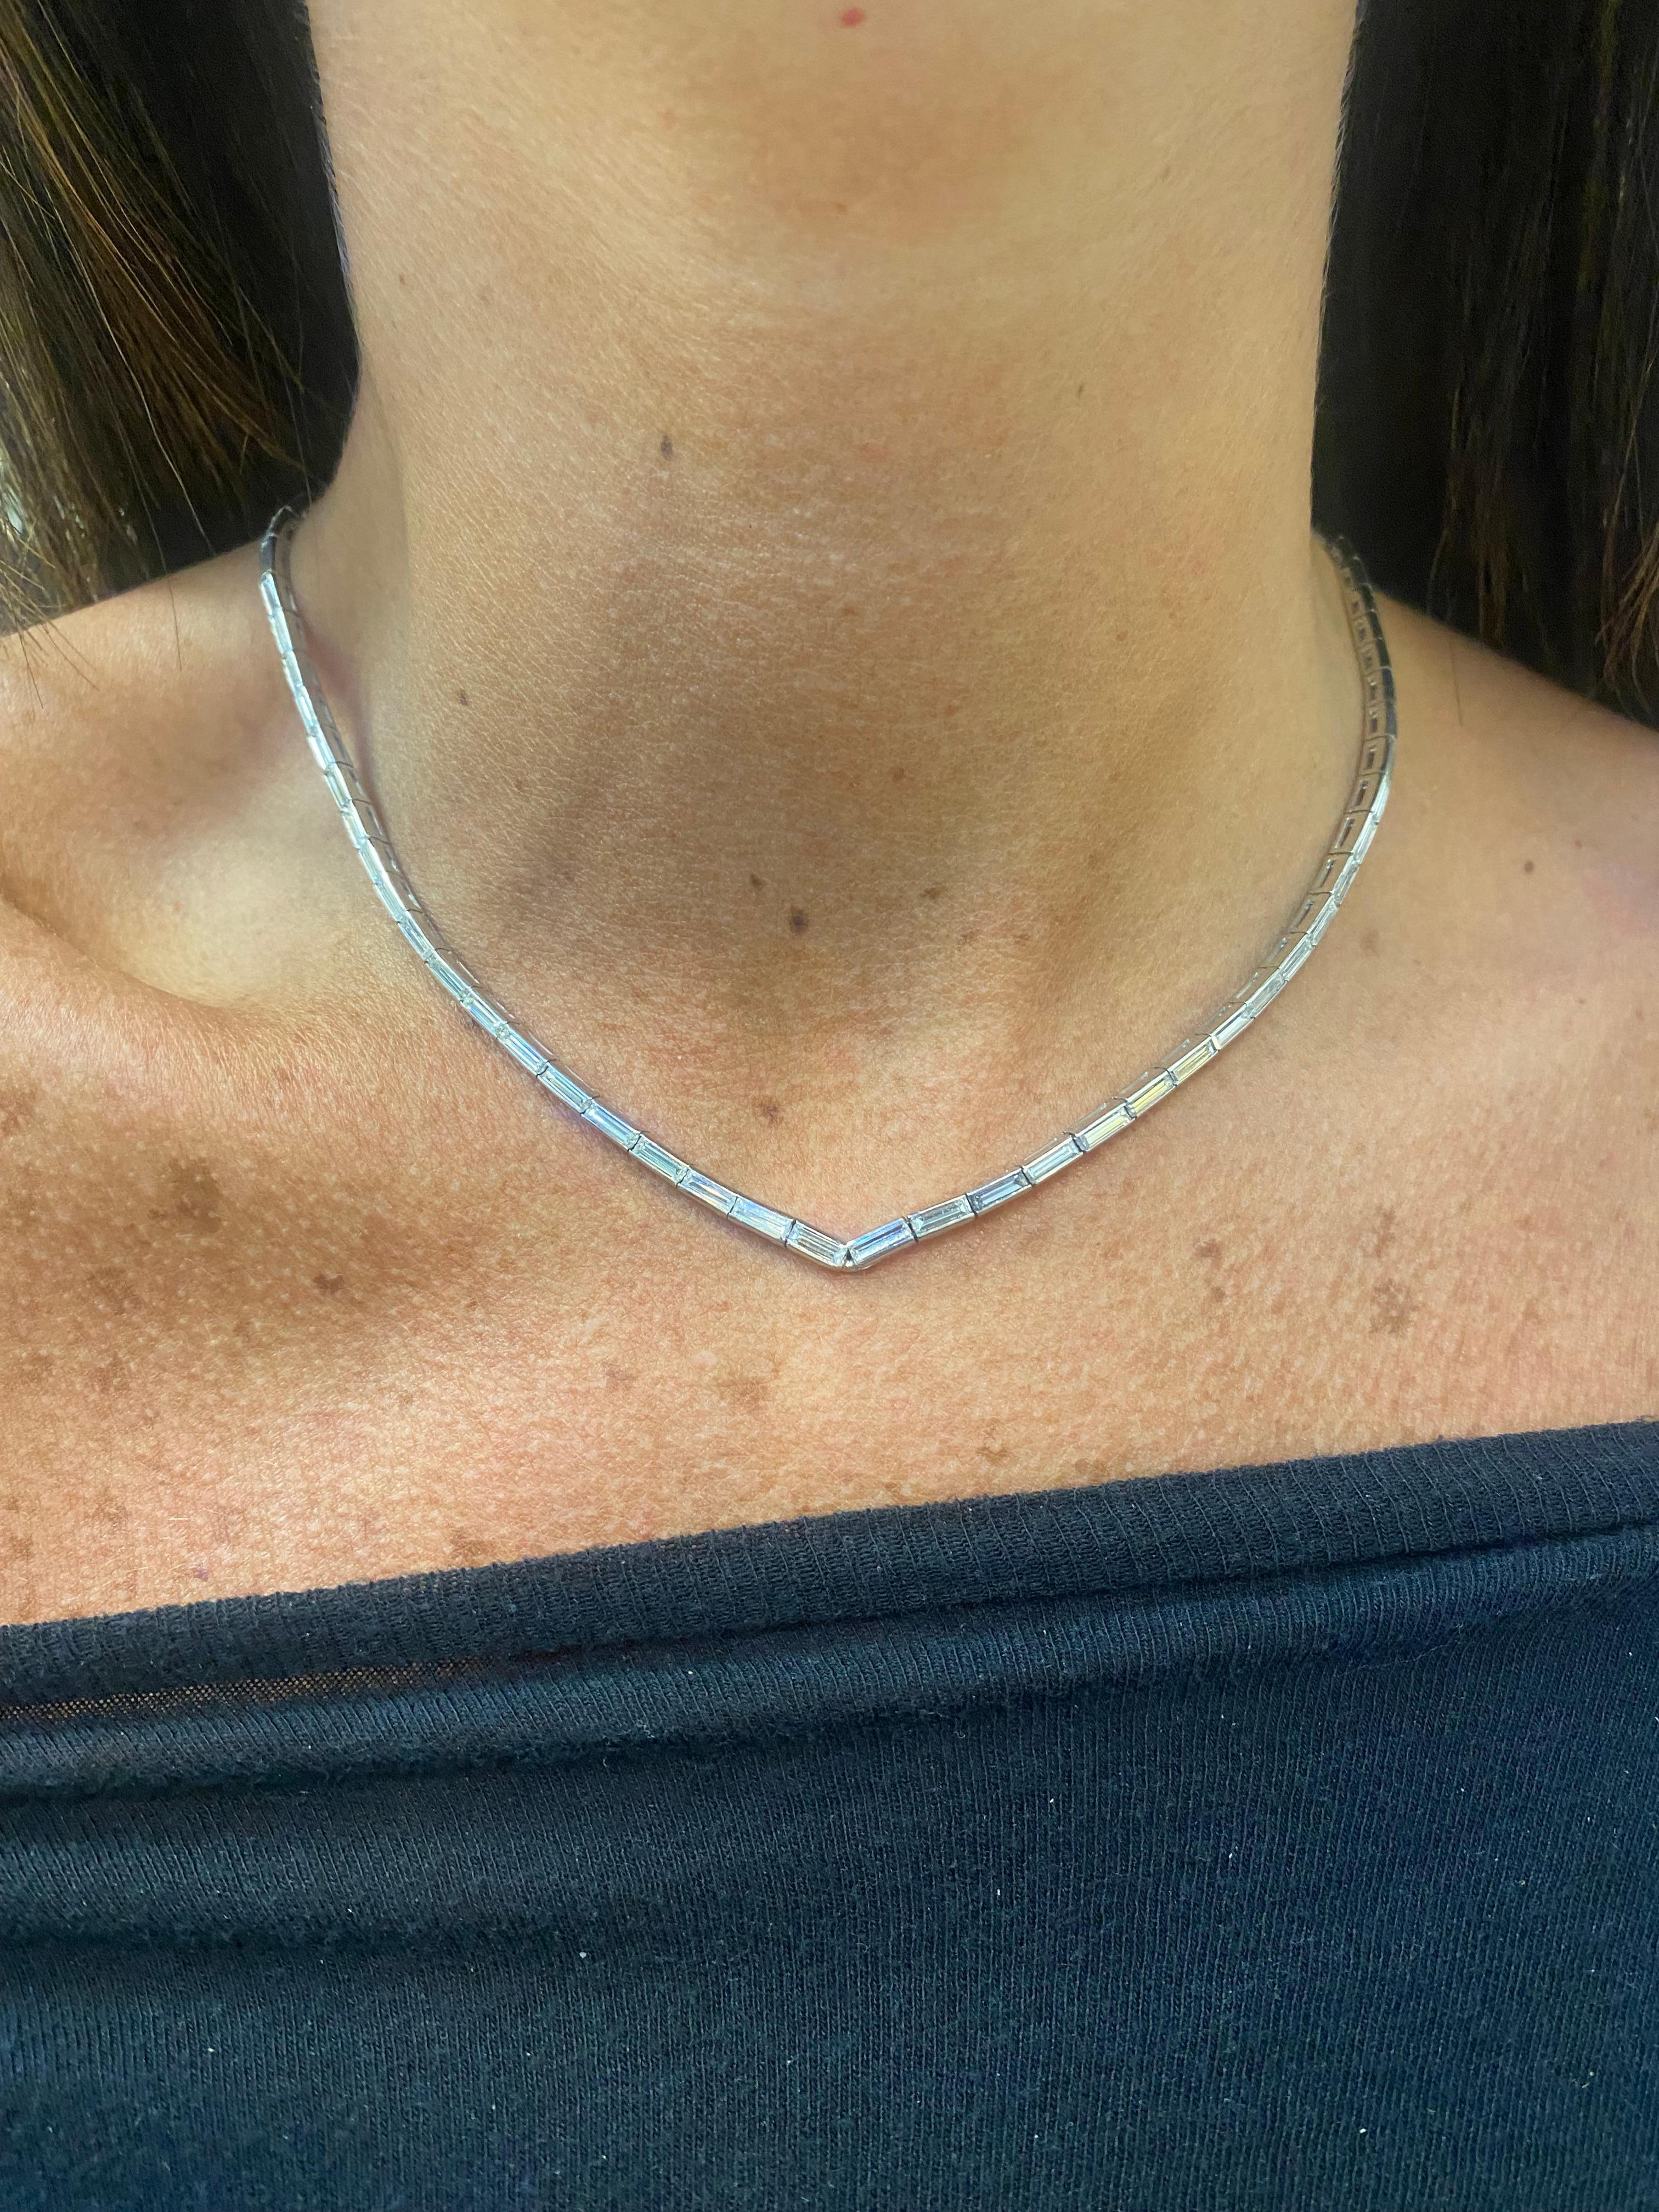 Baguette Cut Diamond Necklace In Excellent Condition For Sale In New York, NY